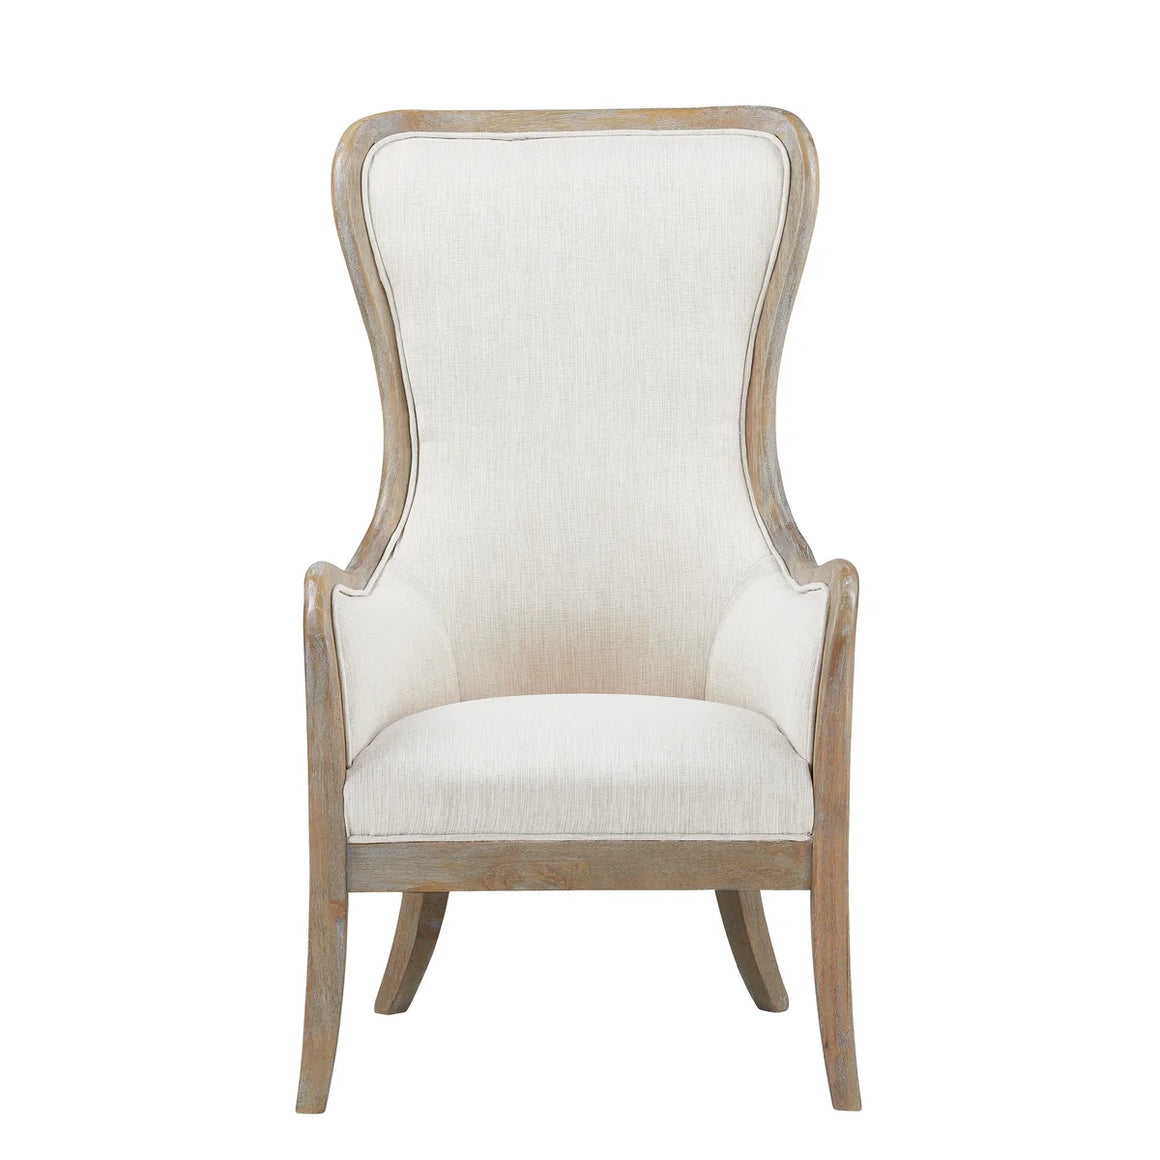 Cleveland Chair (French Linen)